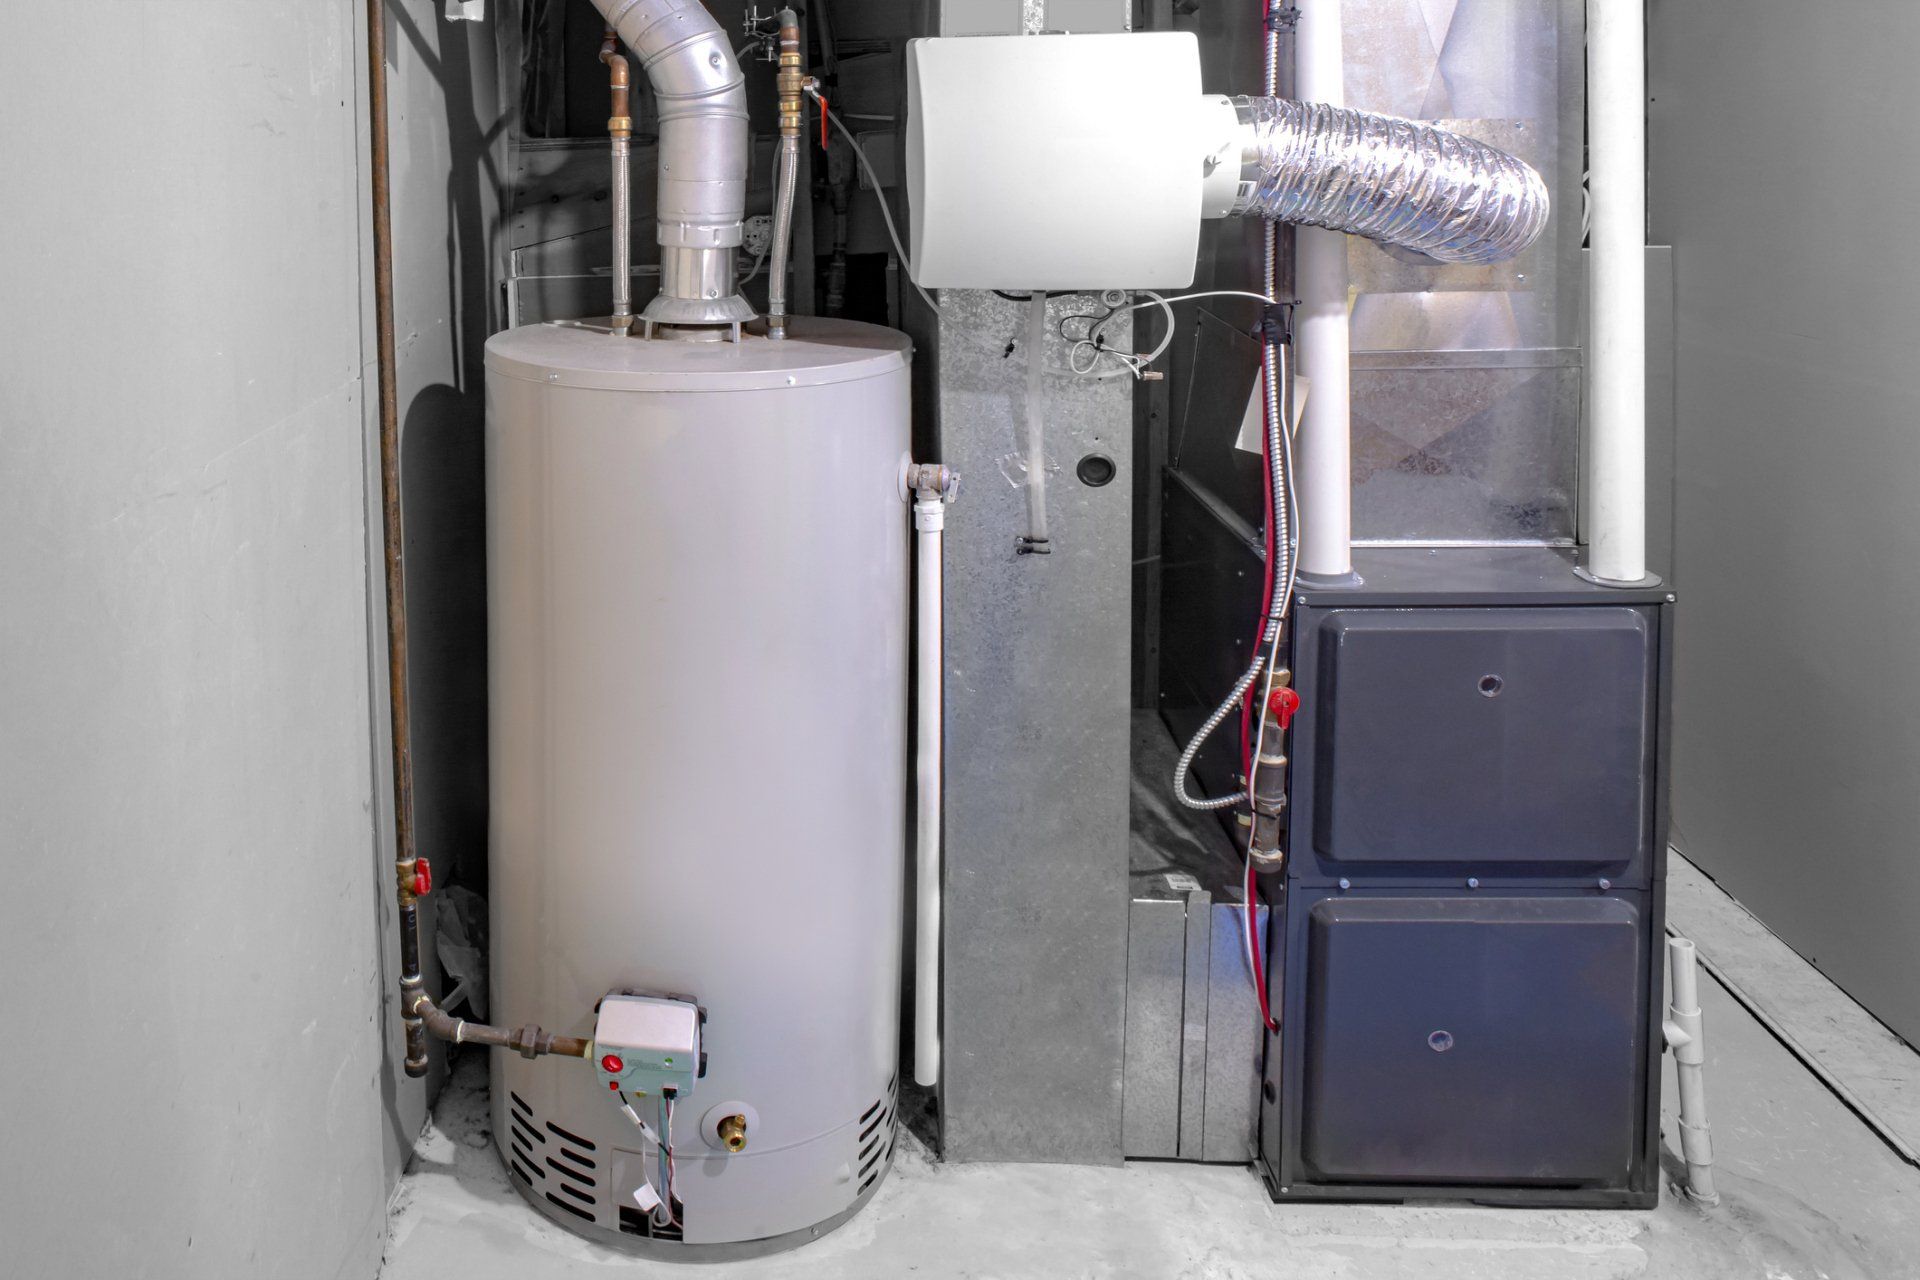 Residential gas water heater & humidifier — Plano, TX — Kleen Air Services